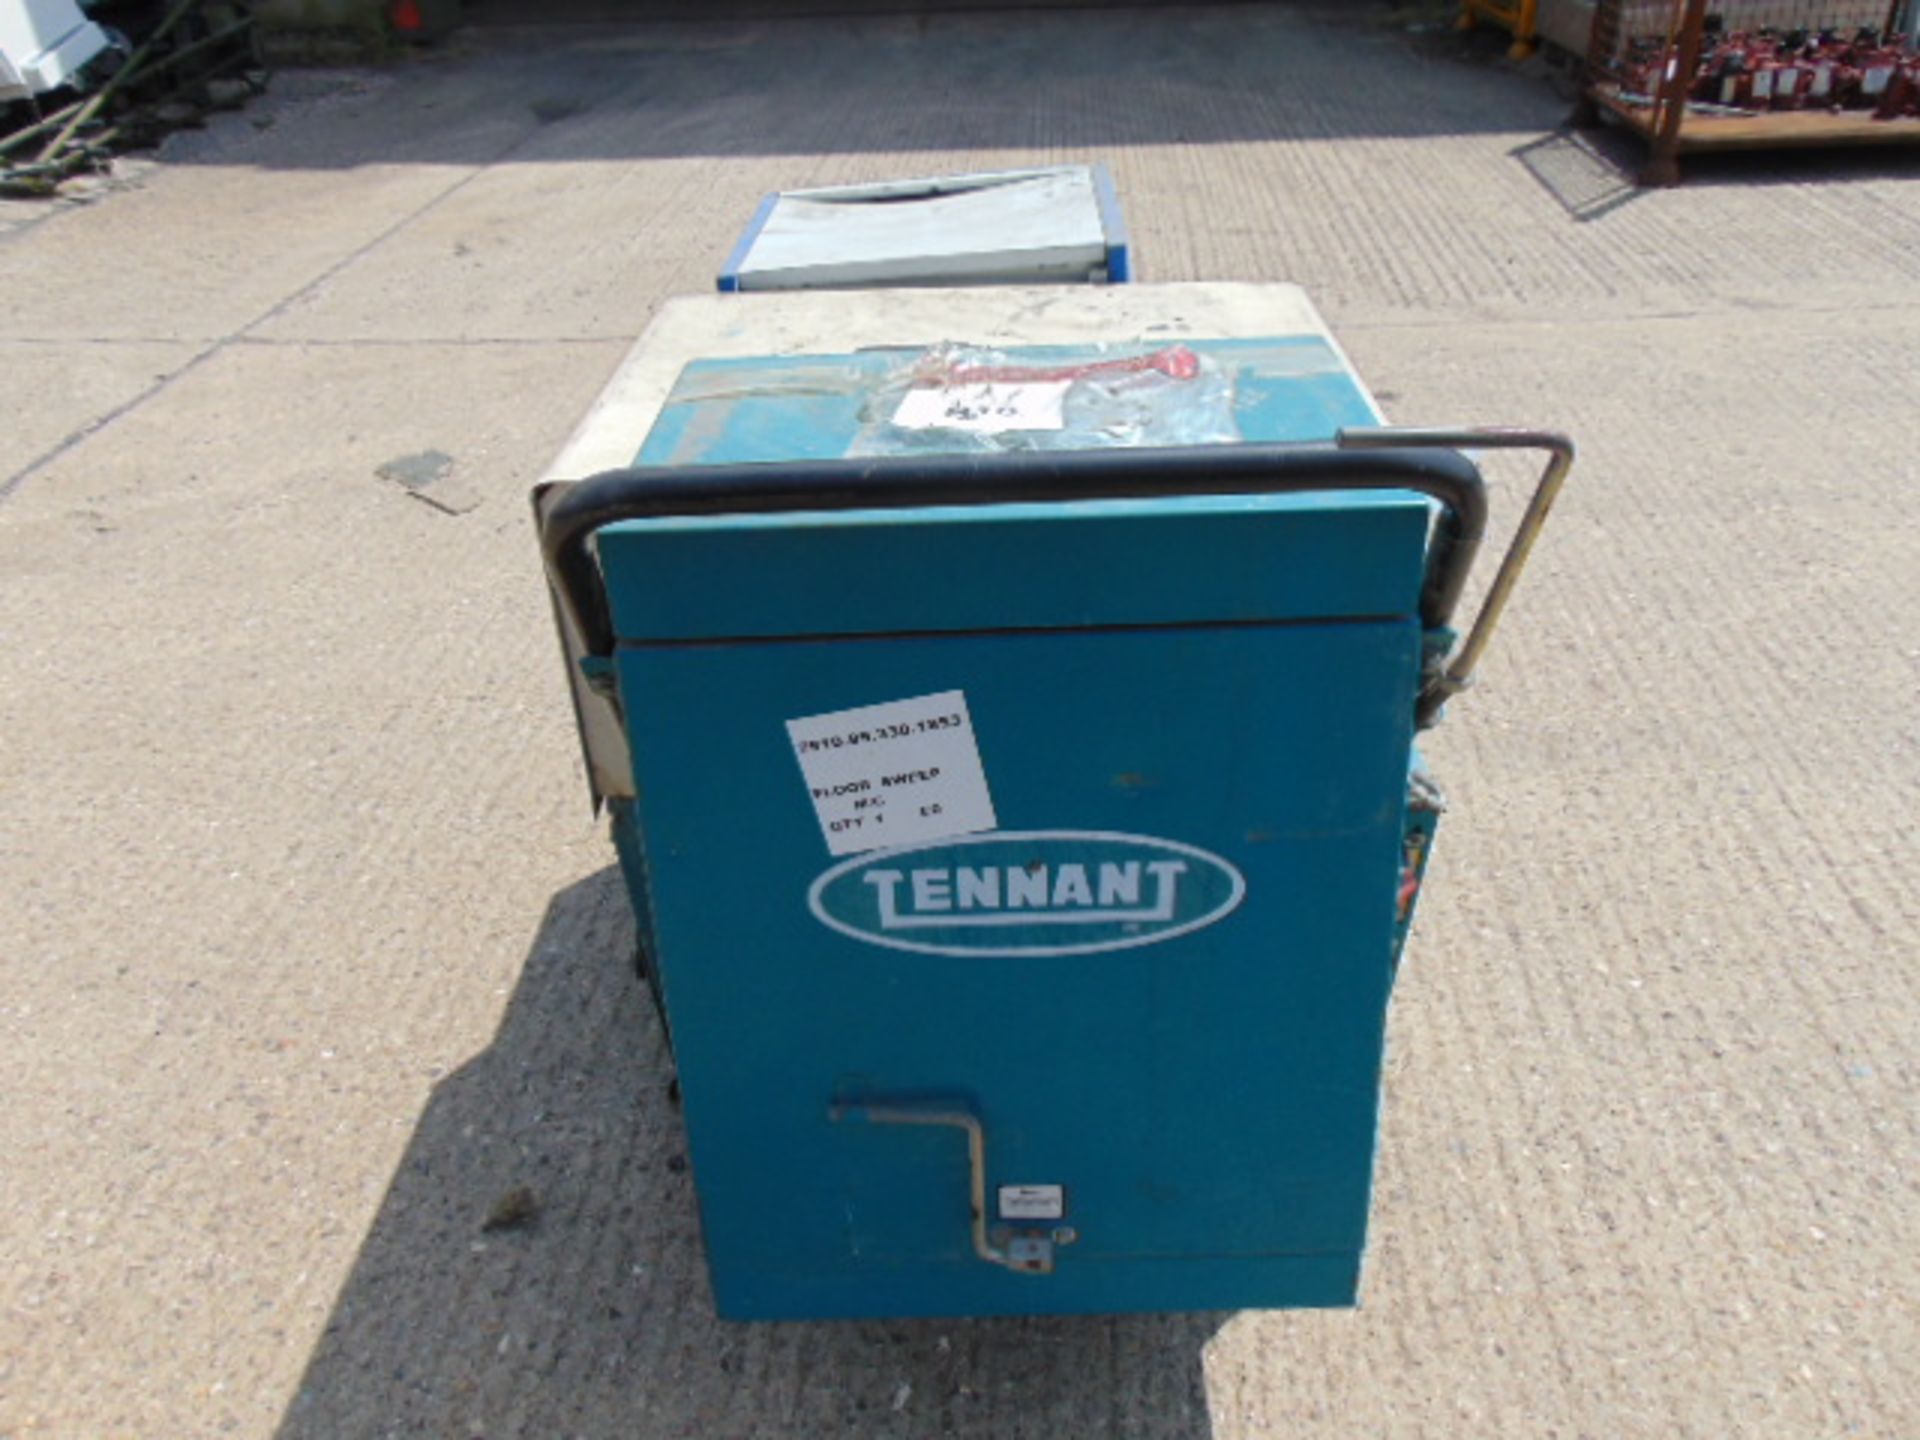 Tennant 42E Walk Behind Electric Sweeper C/W Charger - Image 6 of 11